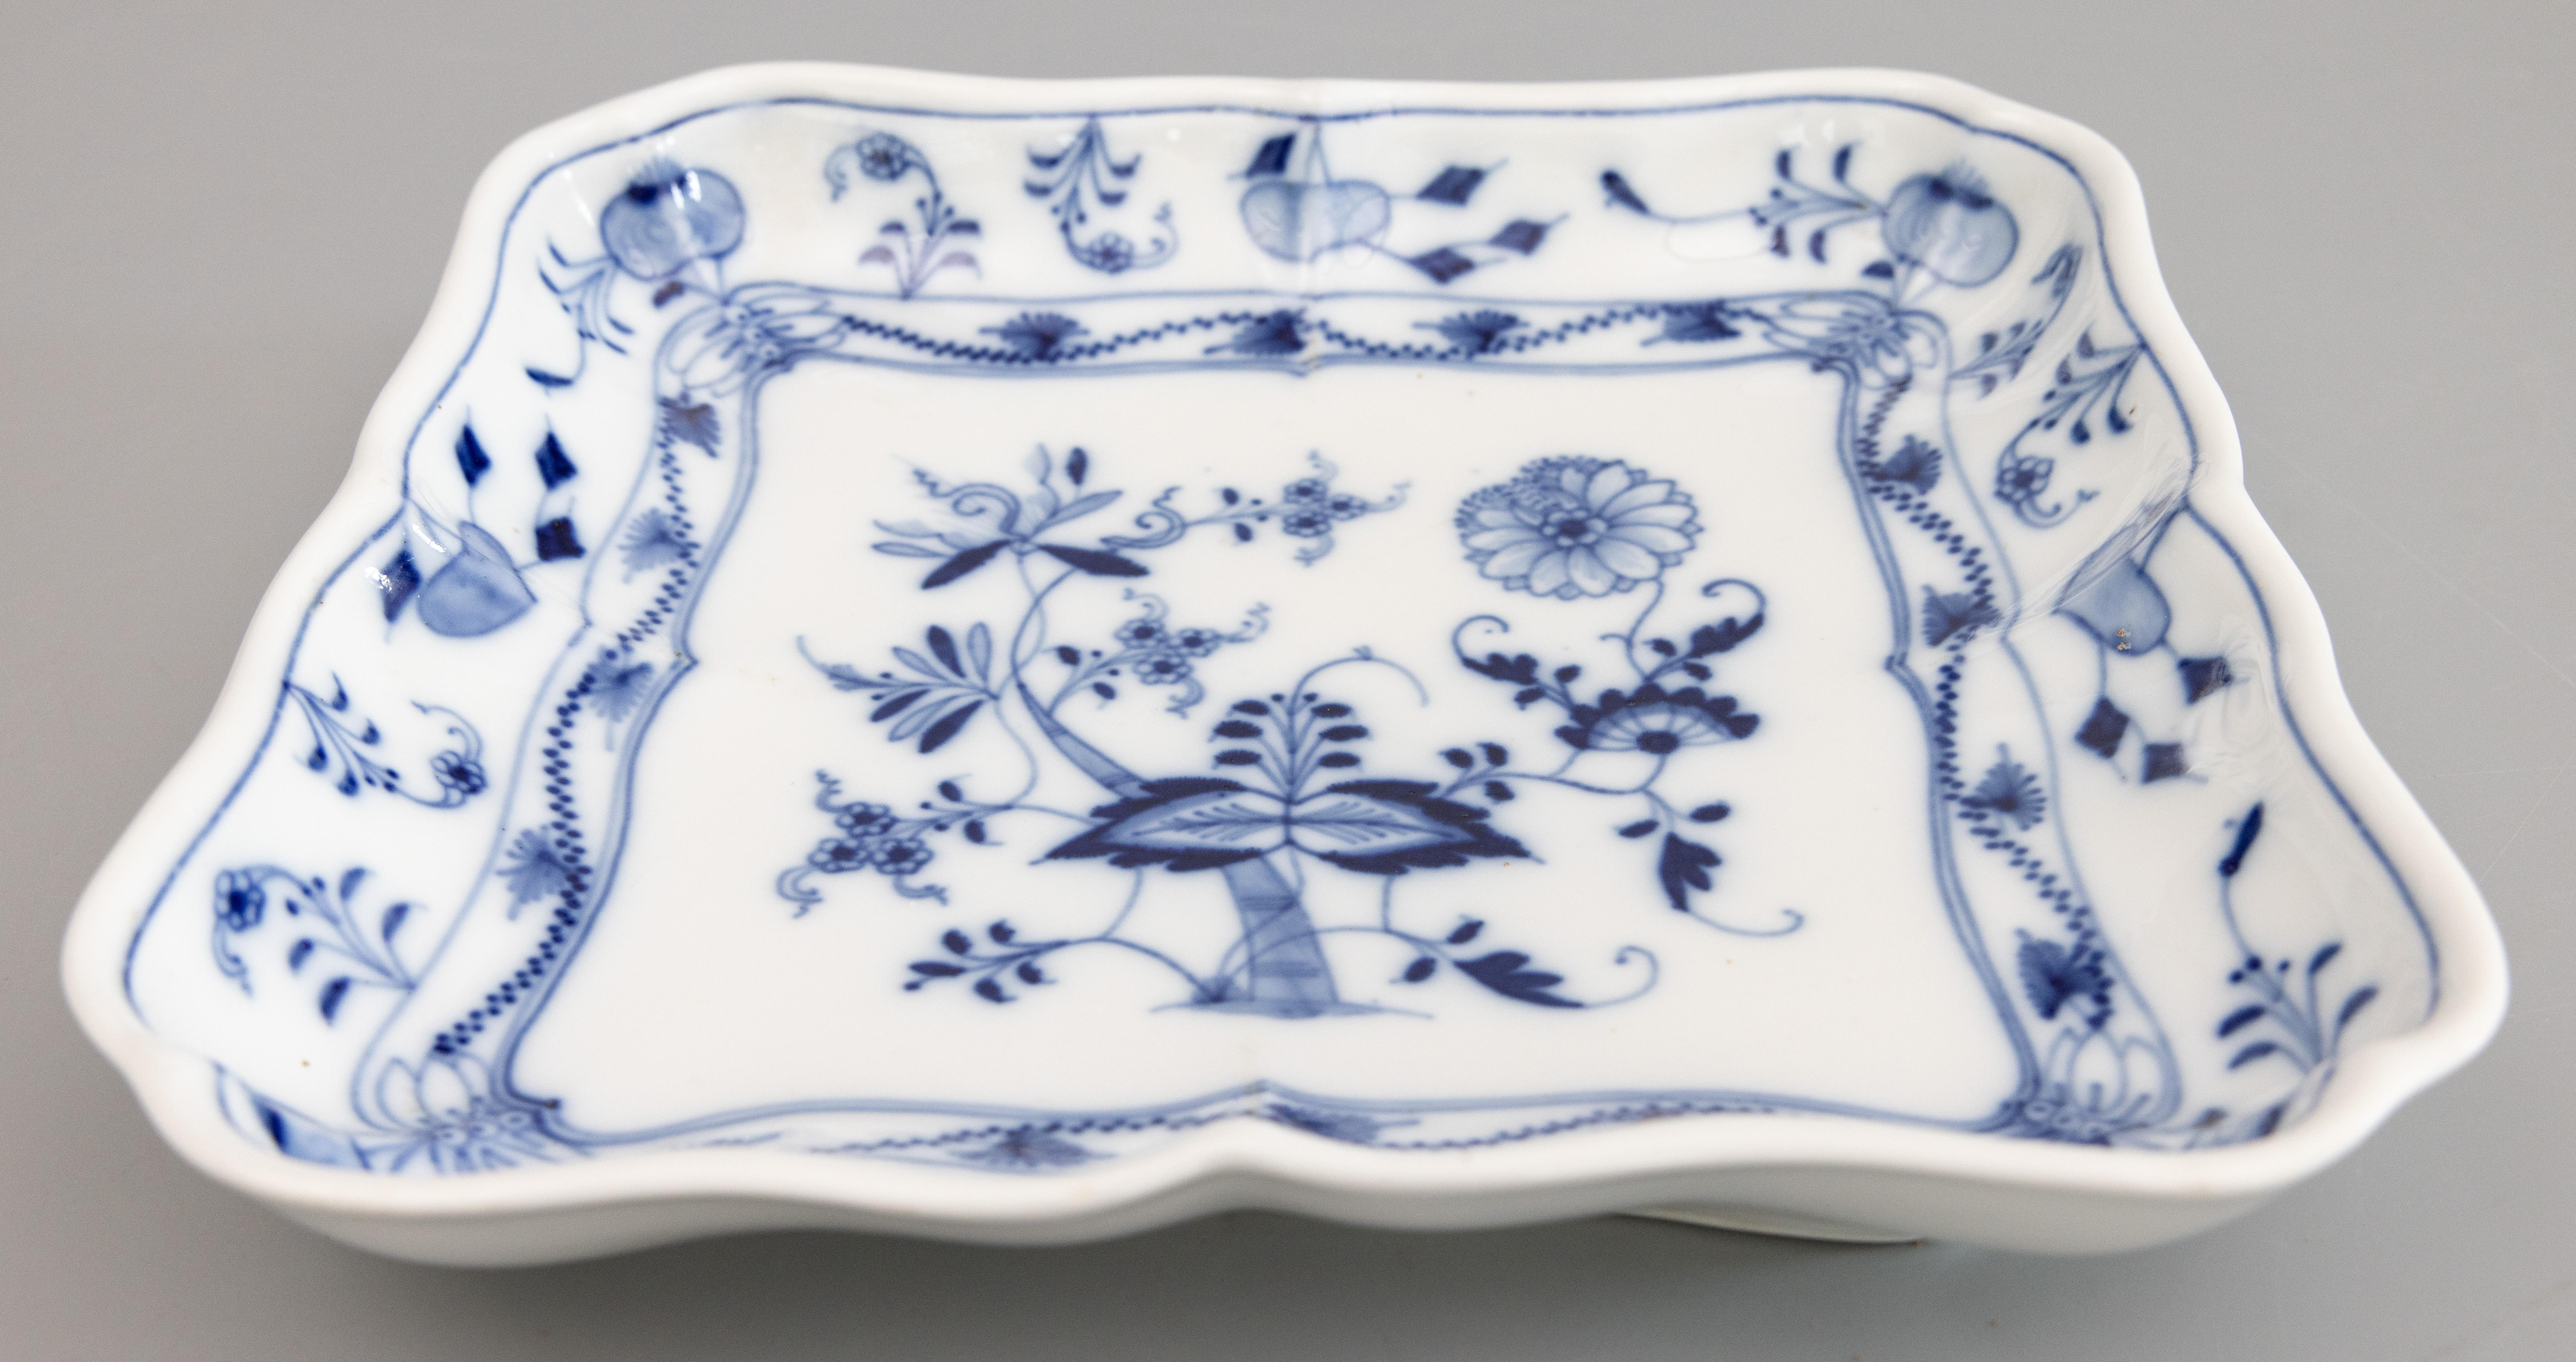 A lovely antique early 20th-Century Meissen blue onion square hand painted porcelain dish with scalloped rim. Printed and impressed 